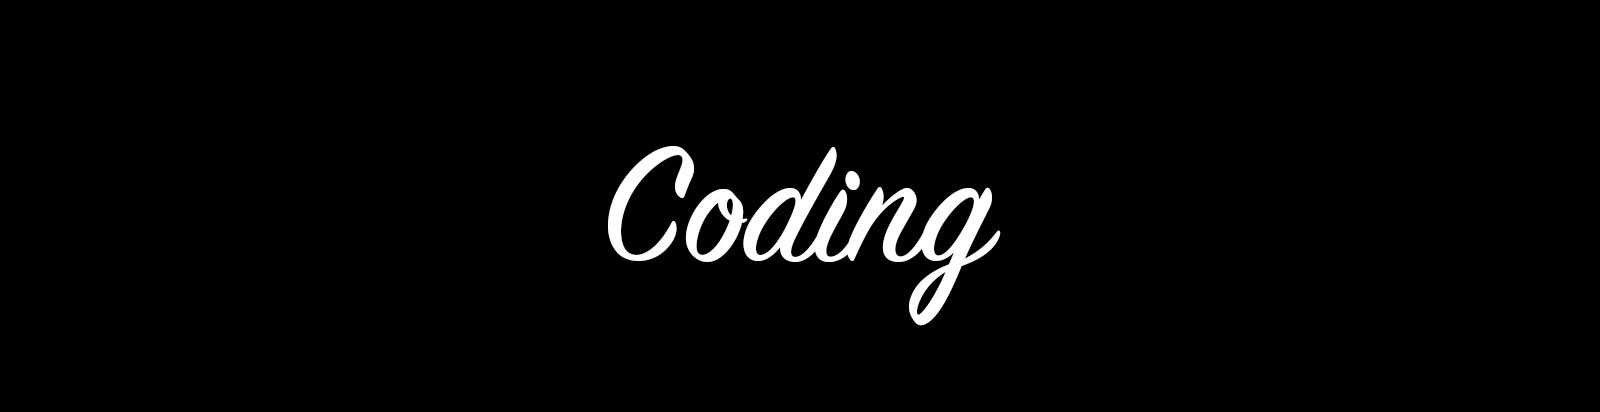 Coding — Browsers, Editors, Terminal, and more